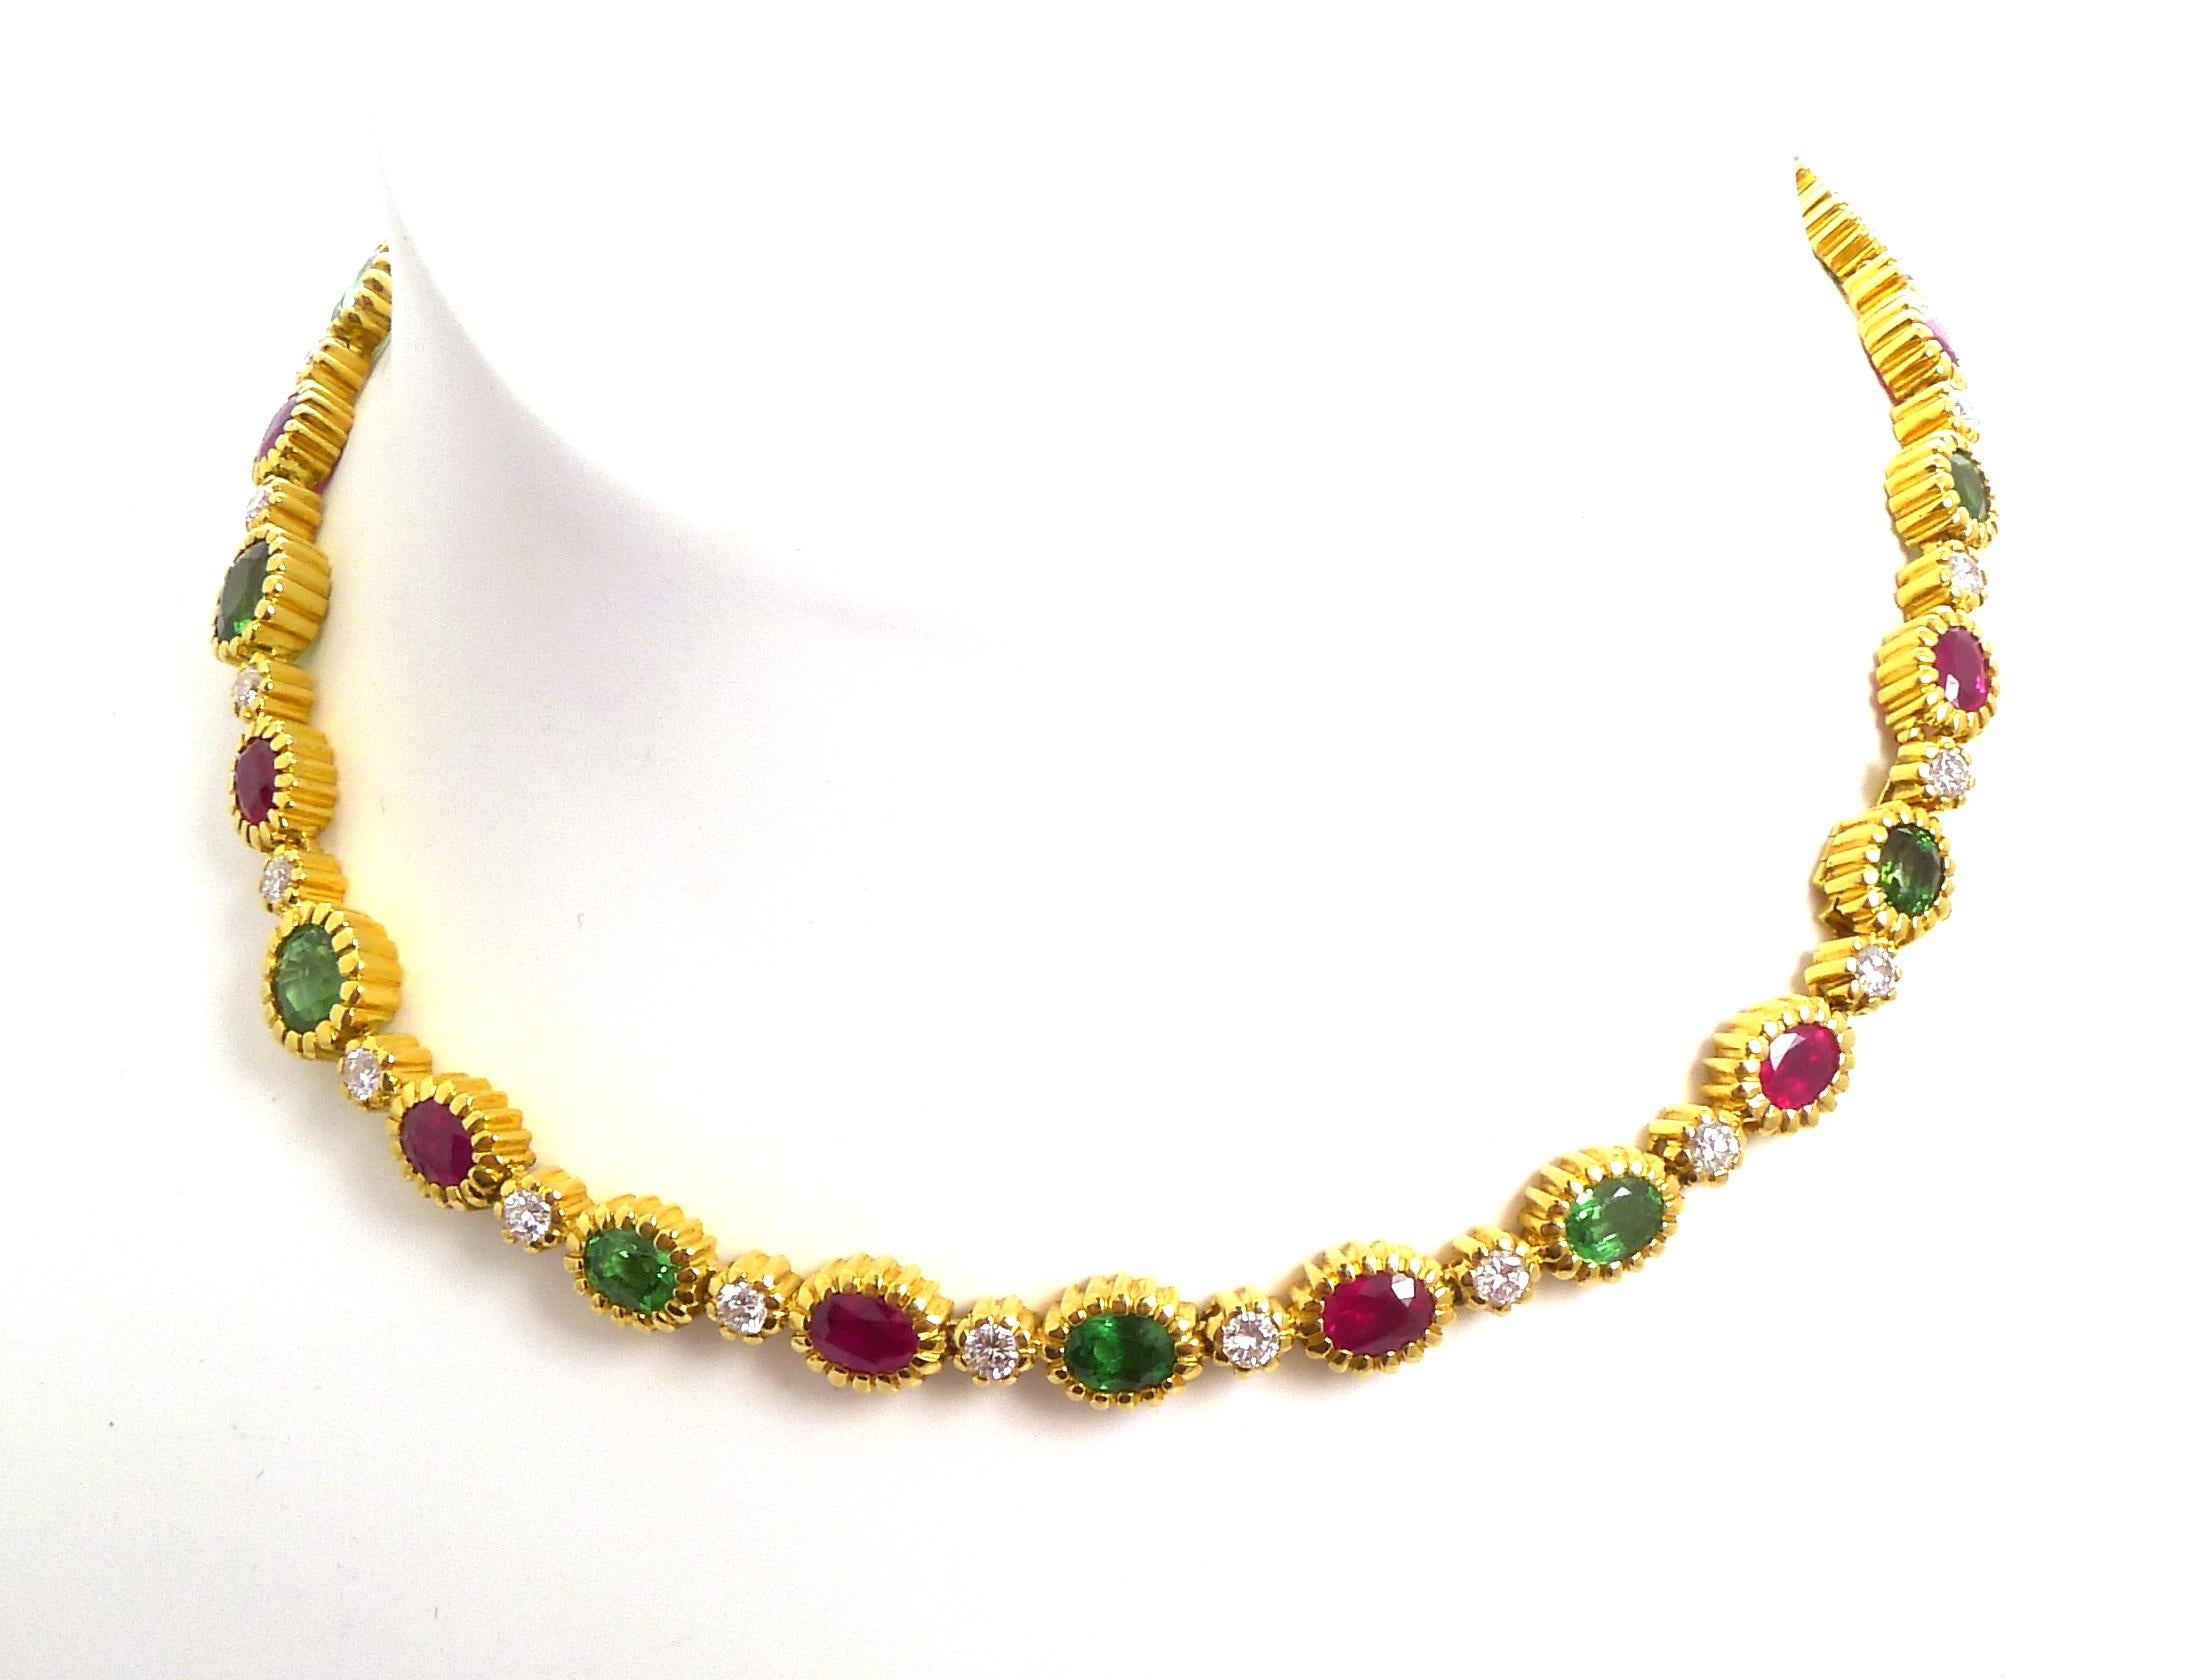 The necklace designed as a line of oval-shaped rubies, oval-shaped green garnets and round diamonds, all in reeded gold bezels

The bracelet en suite, designed as a line of oval-shaped rubies, oval-shaped green garnets and round diamonds, all in